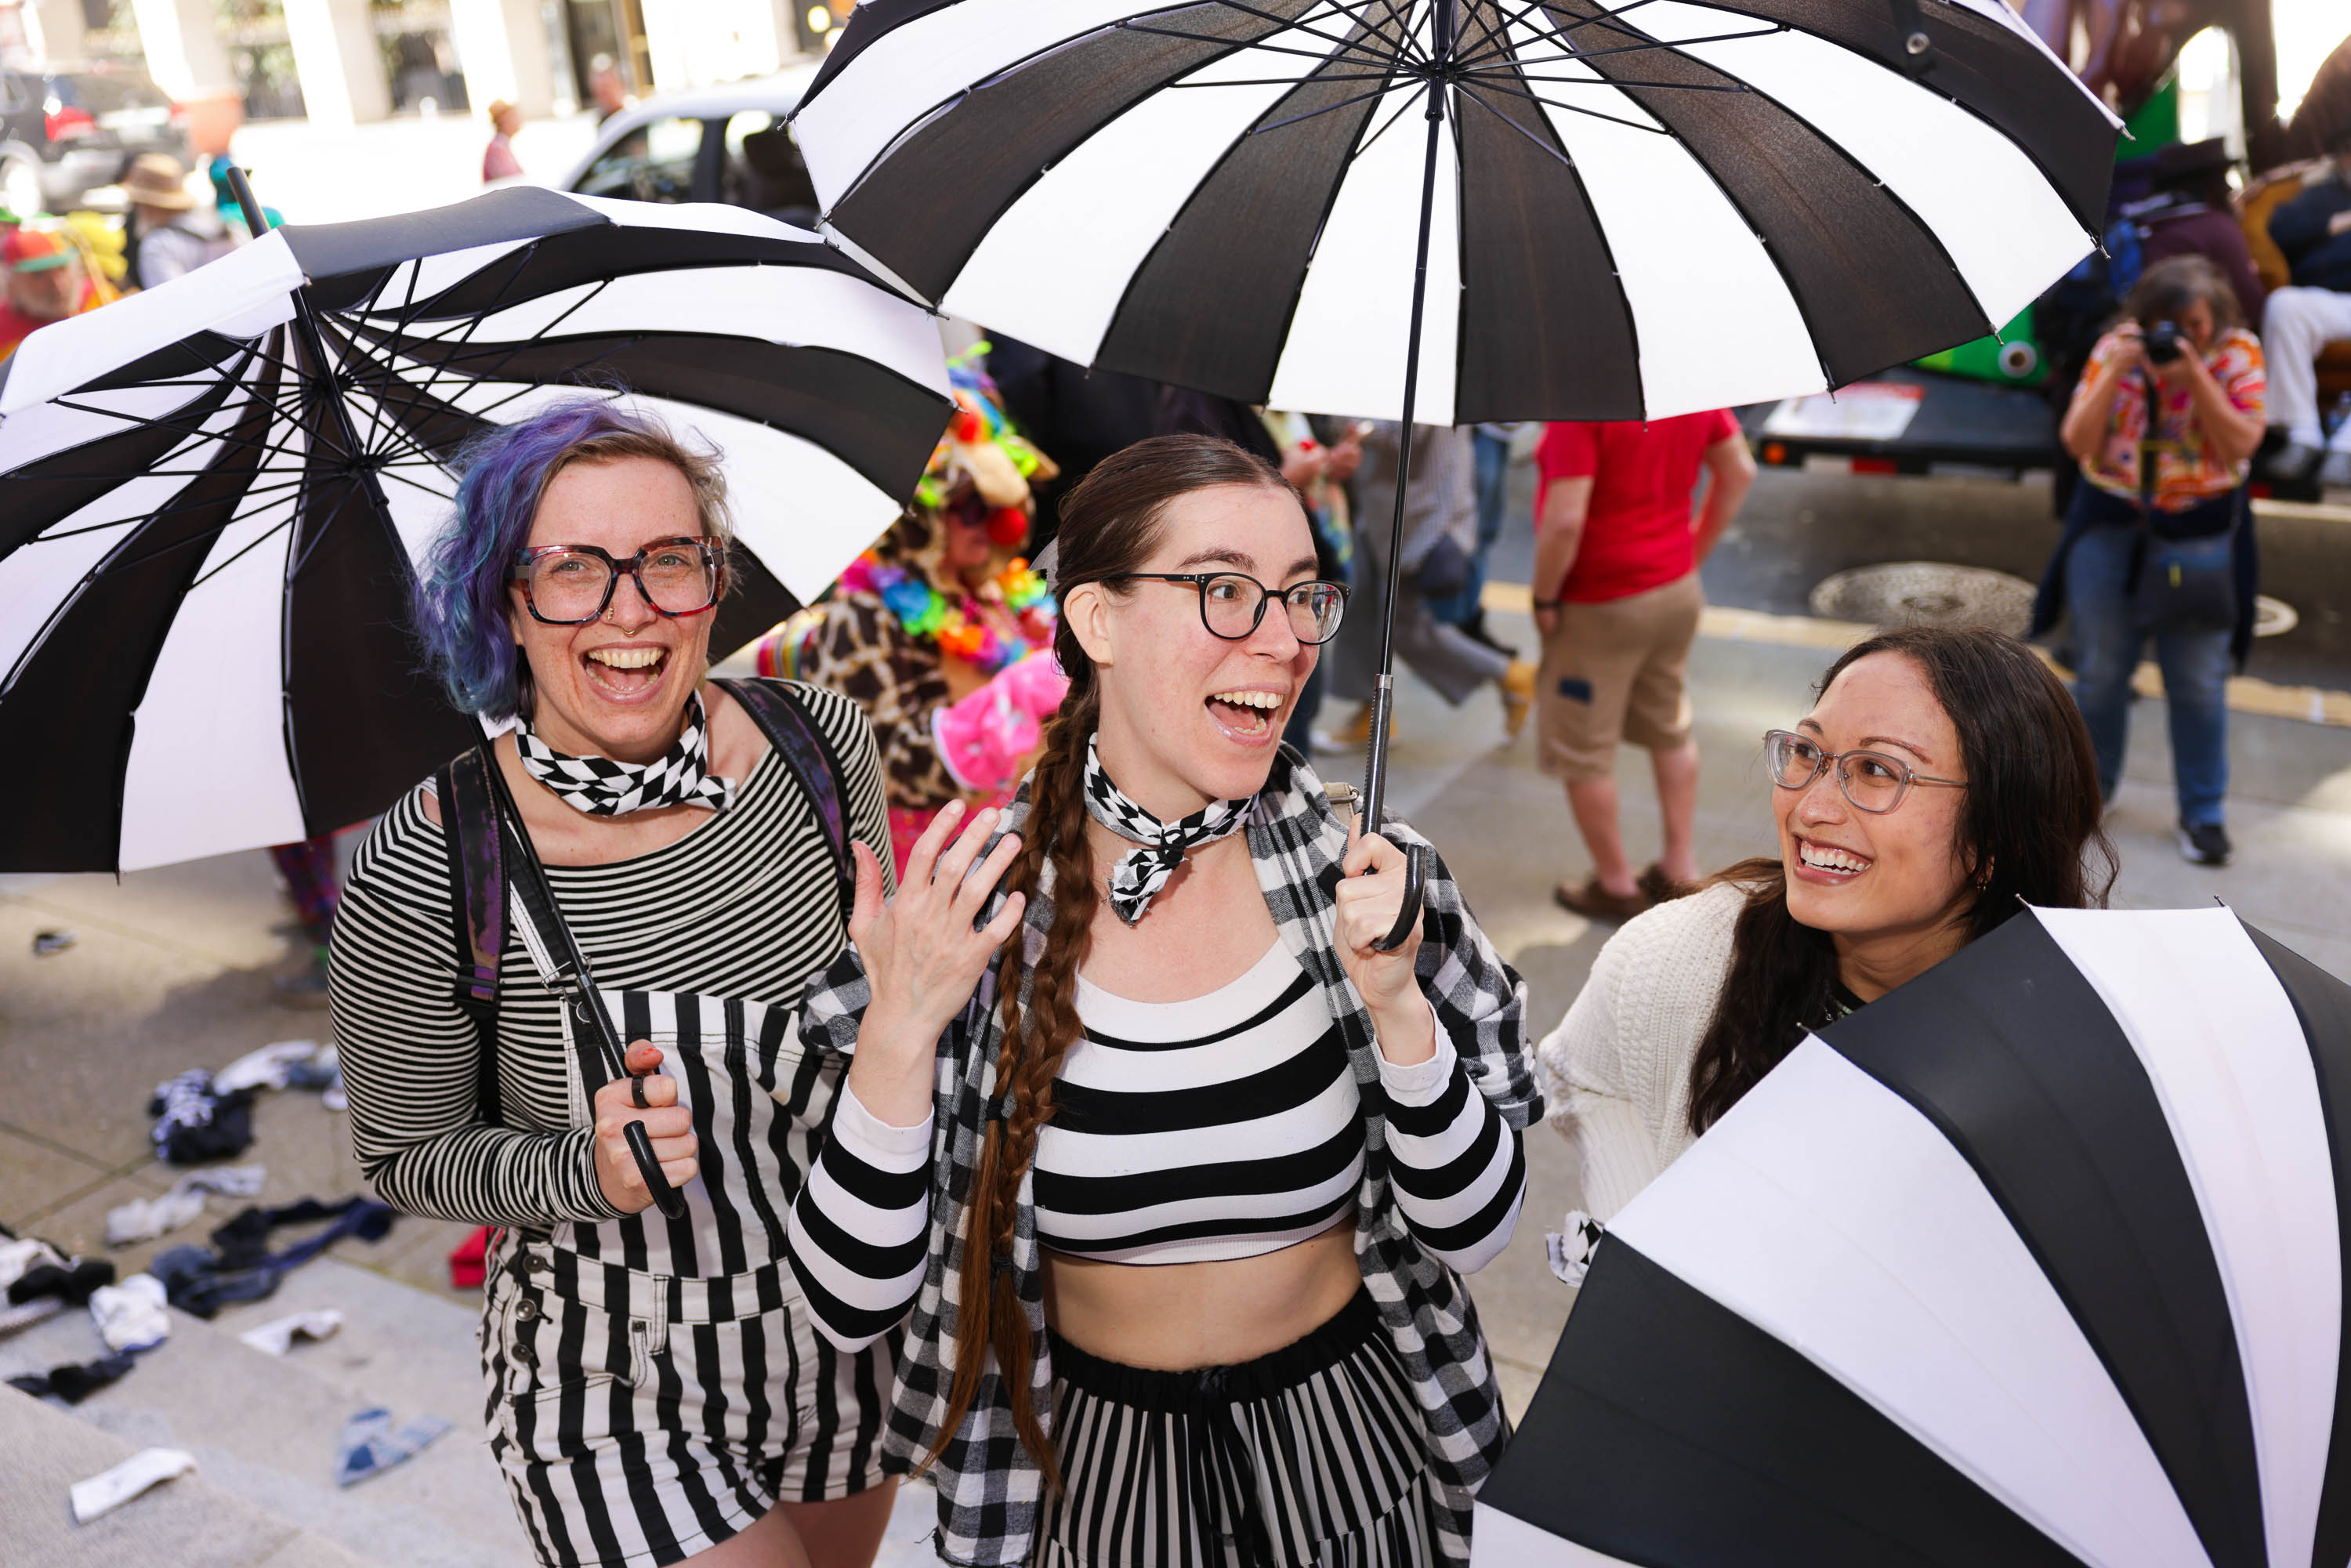 Three women are smiling under black and white striped umbrellas, wearing similar patterned clothing.